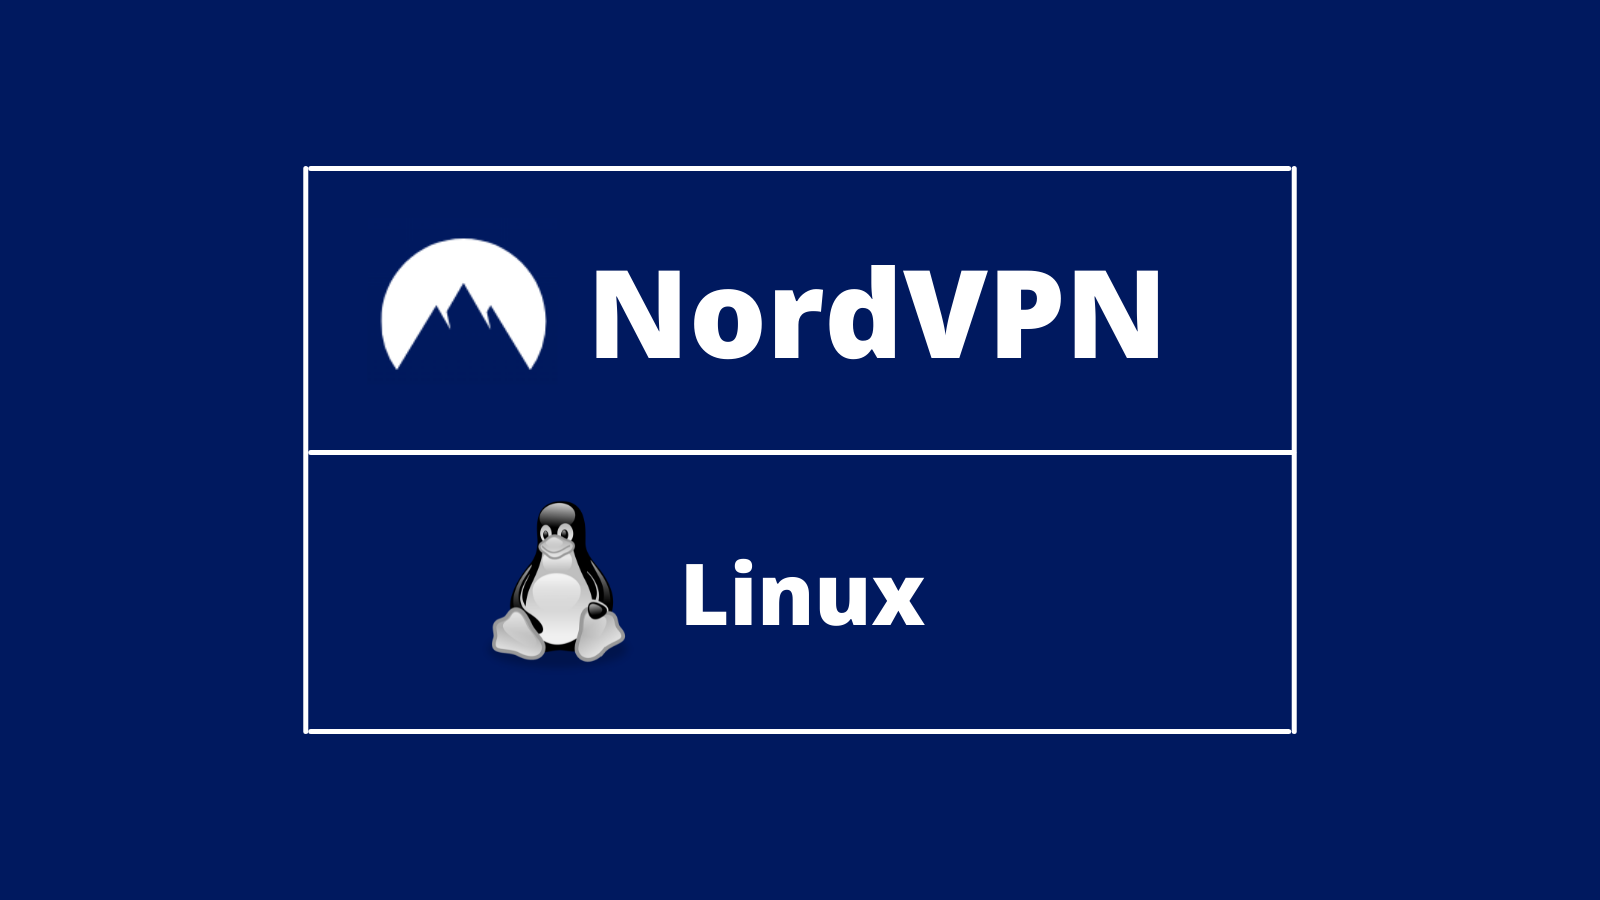 nordvpn download for linux